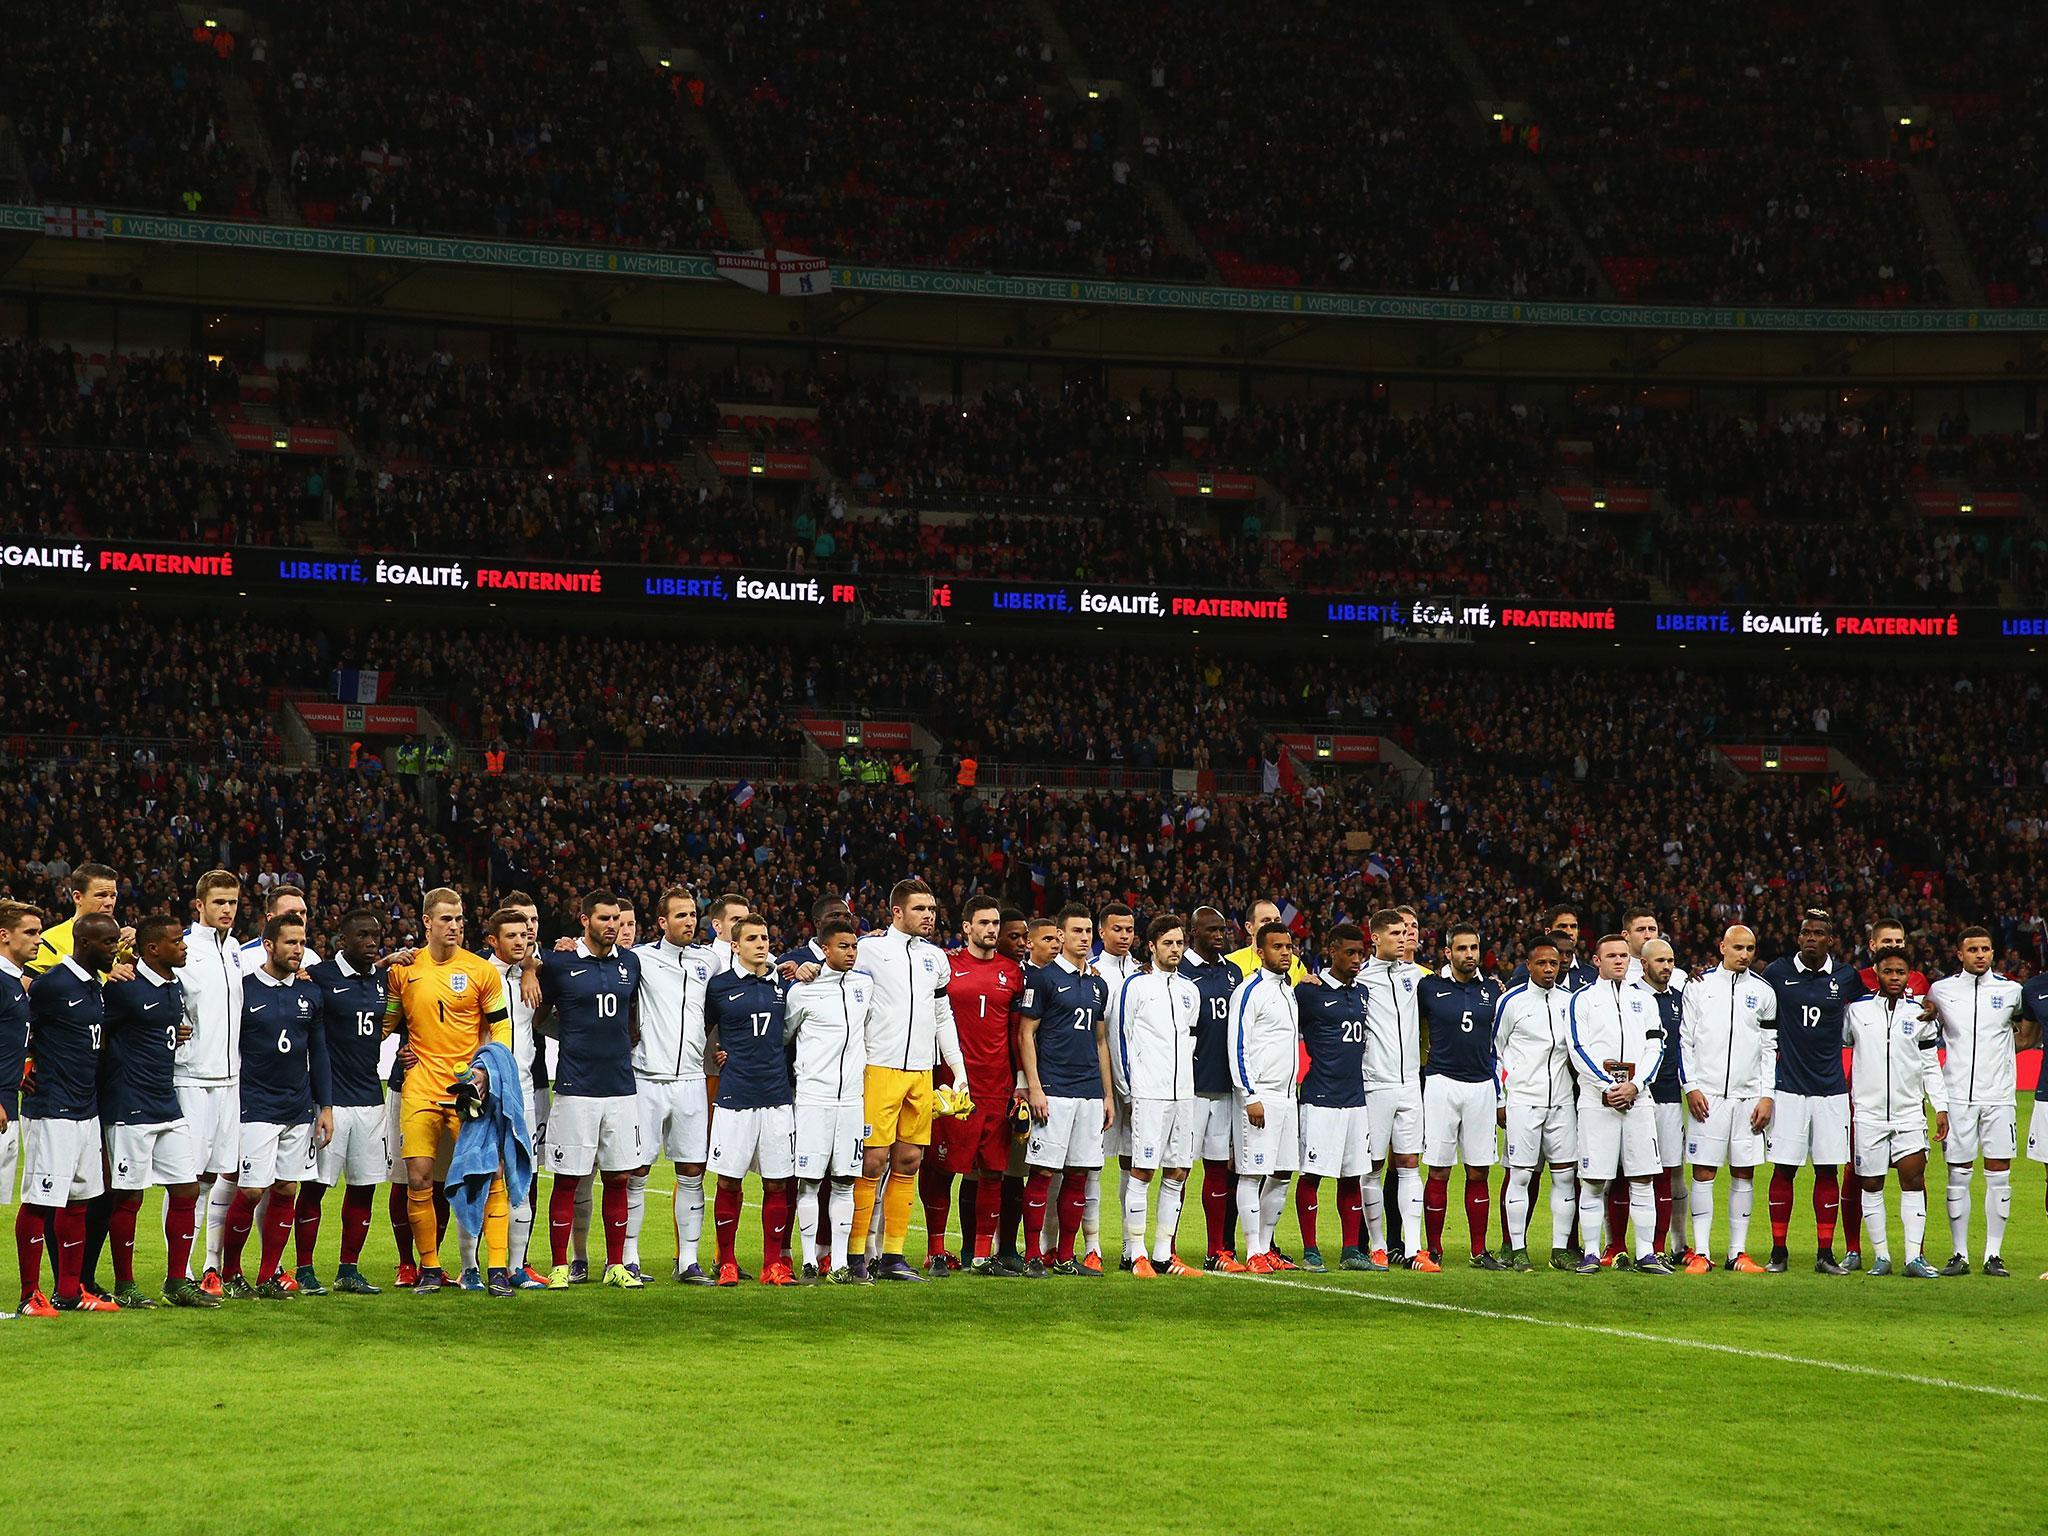 England and France honoured victims of the Paris attacks the last time the two sides met